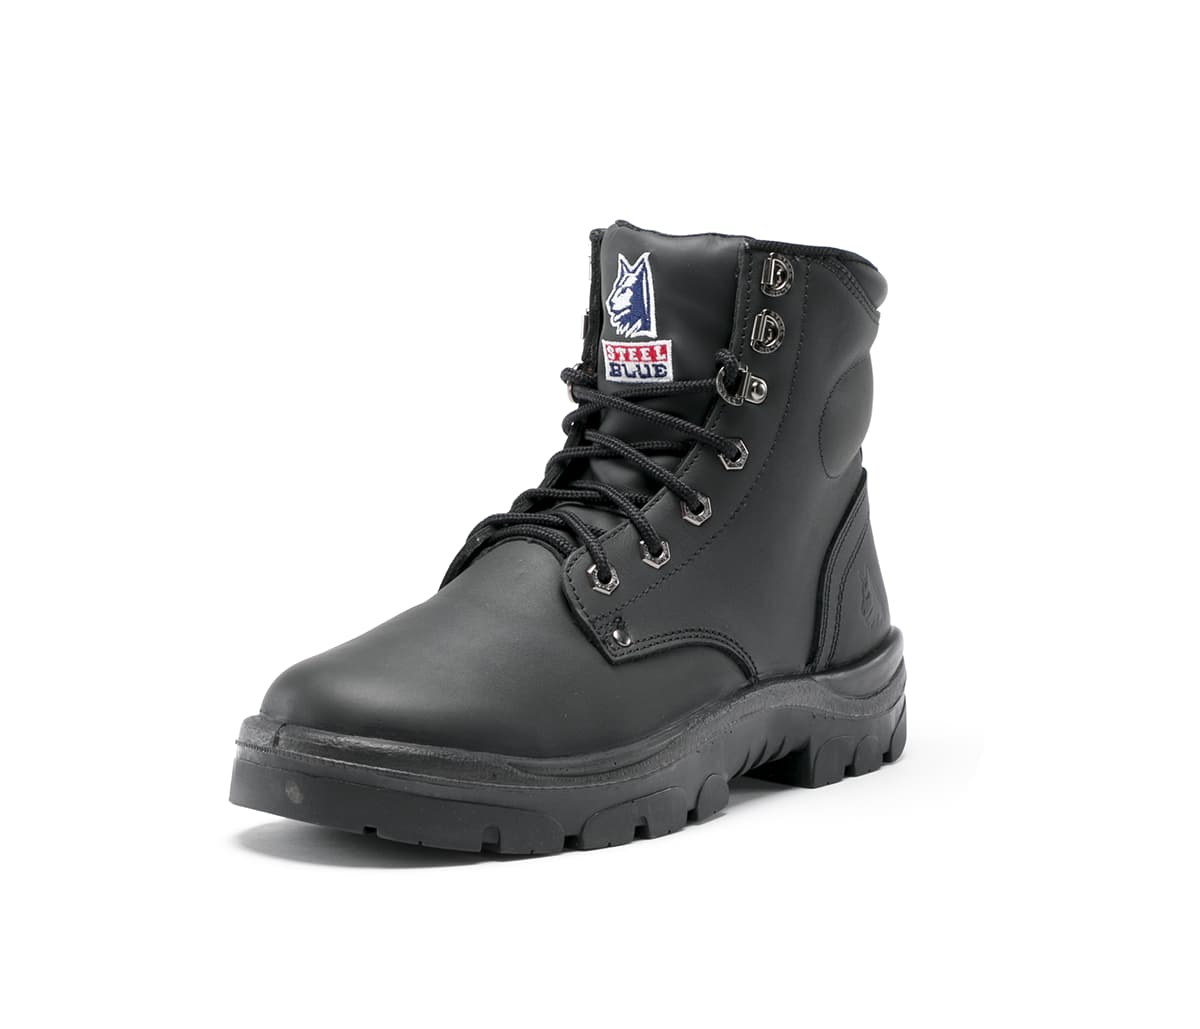 zip sided non safety boots cheap online